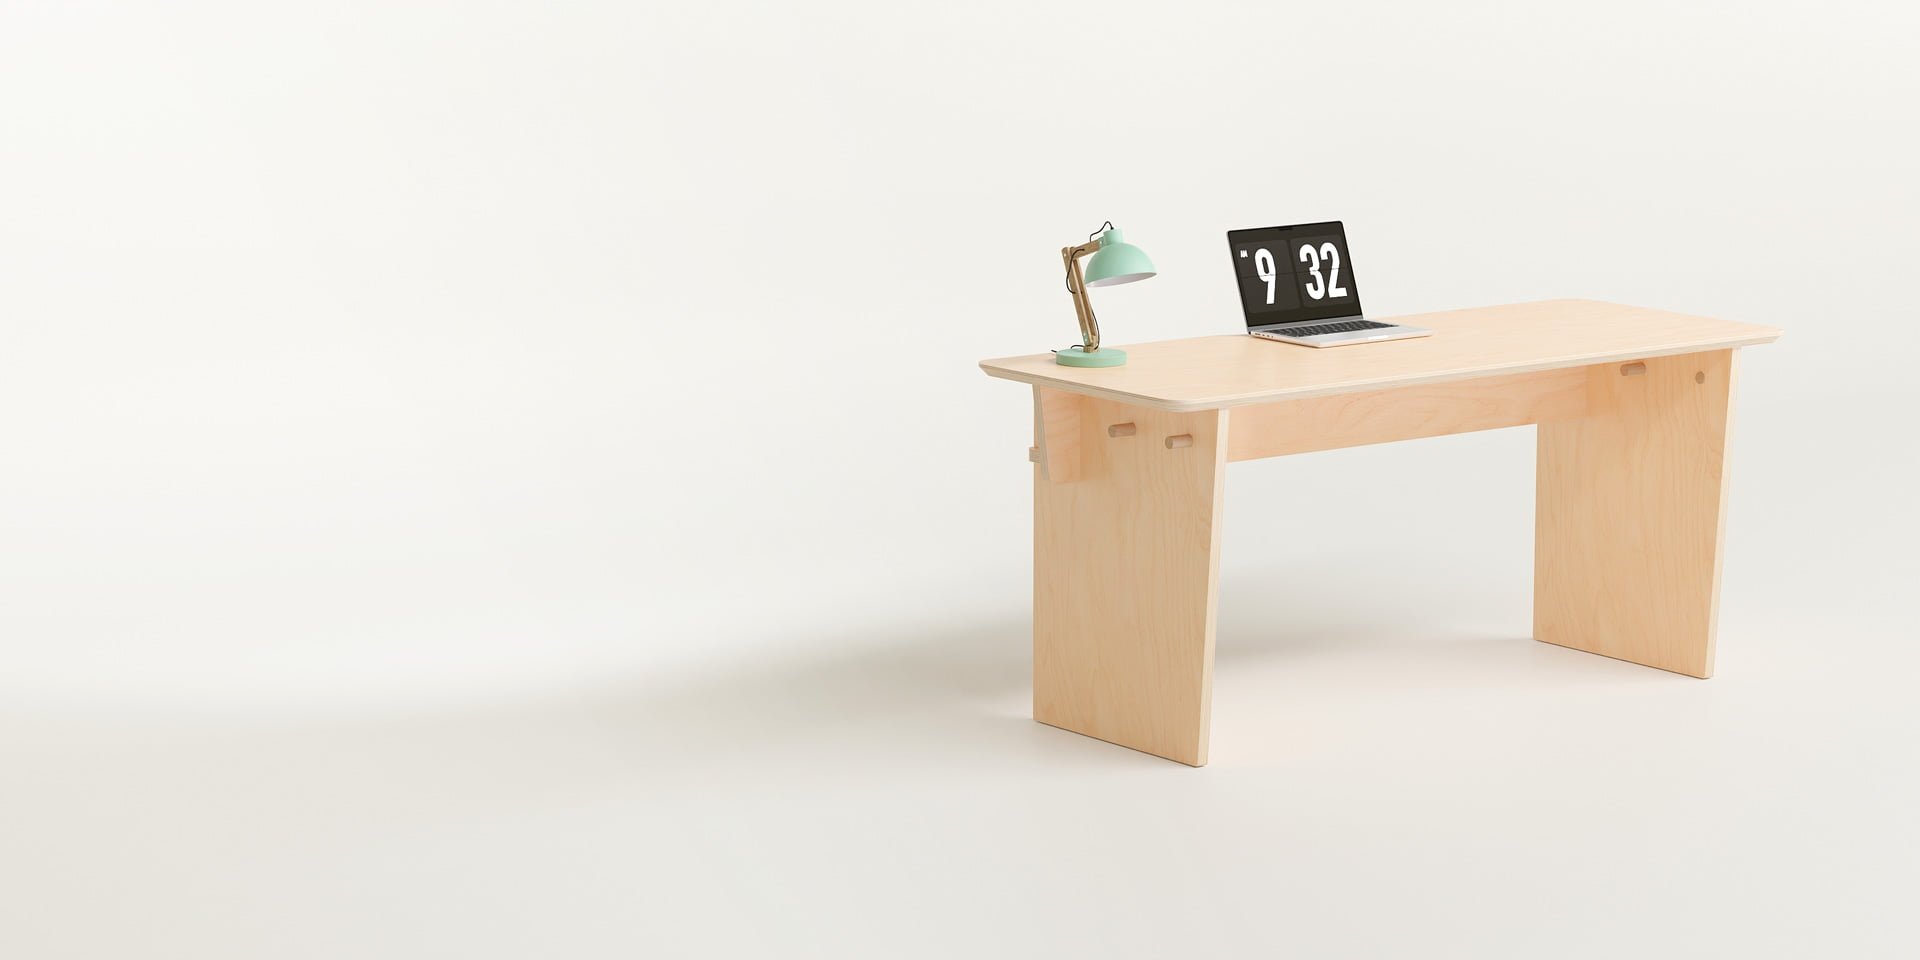 The Ecosium Studio desk made from sustainable timber in Australia sitting on a white background with a green desk lamp and an Apple laptop